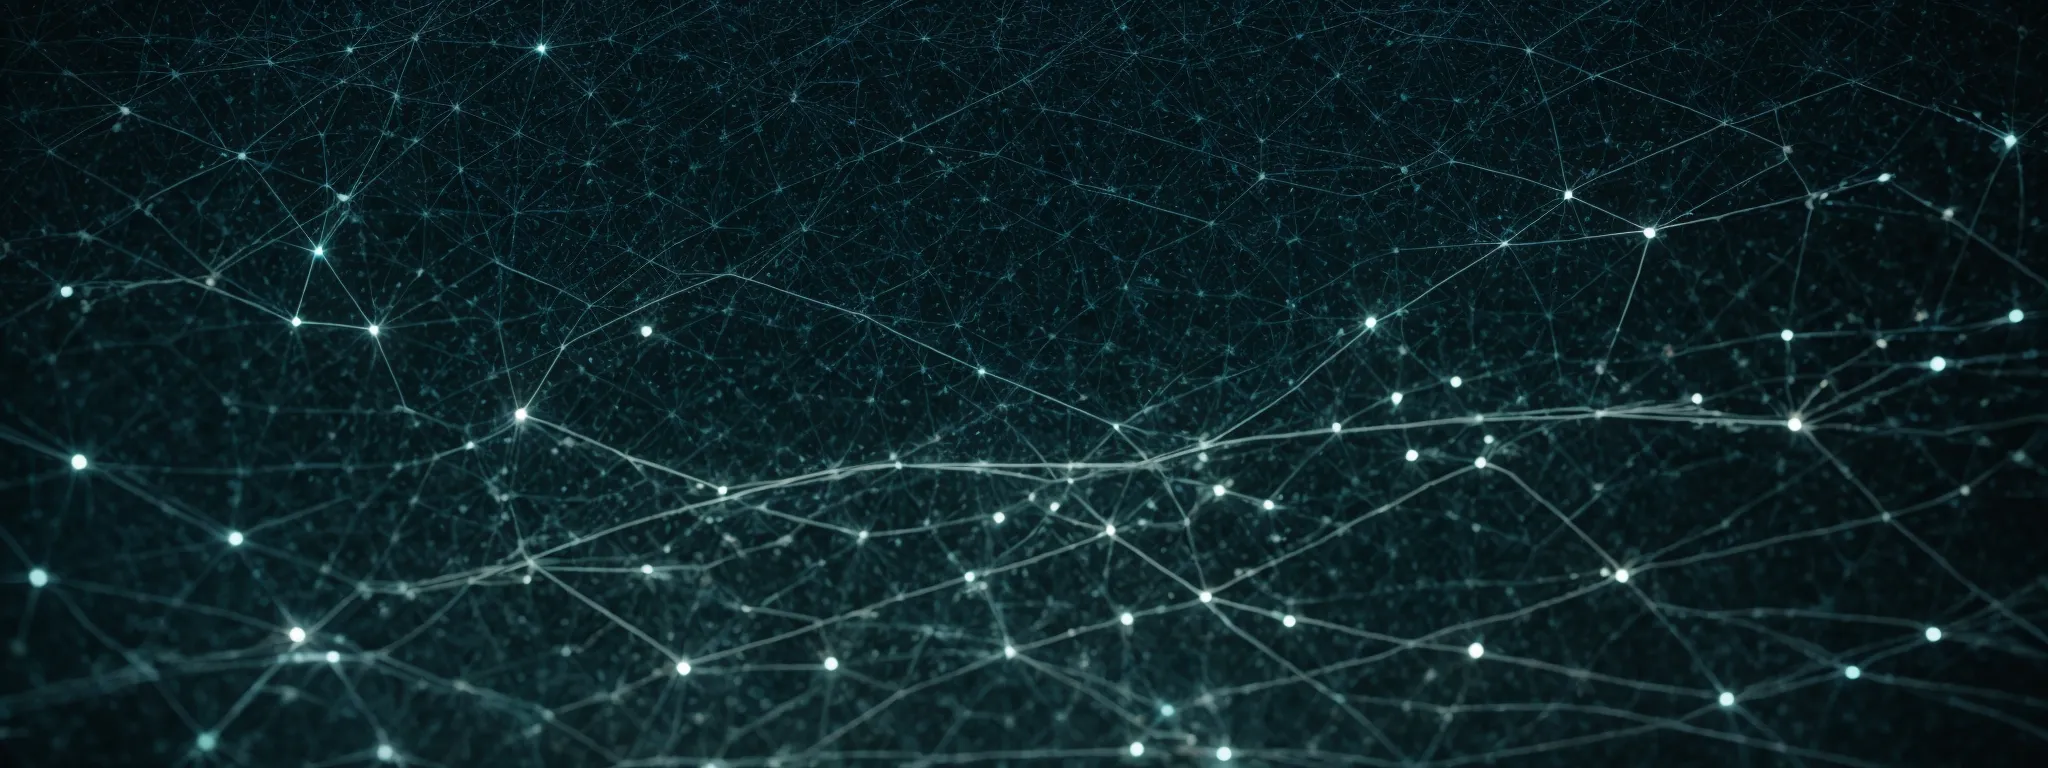 a matrix of interconnected nodes and pathways symbolizing a vast network.